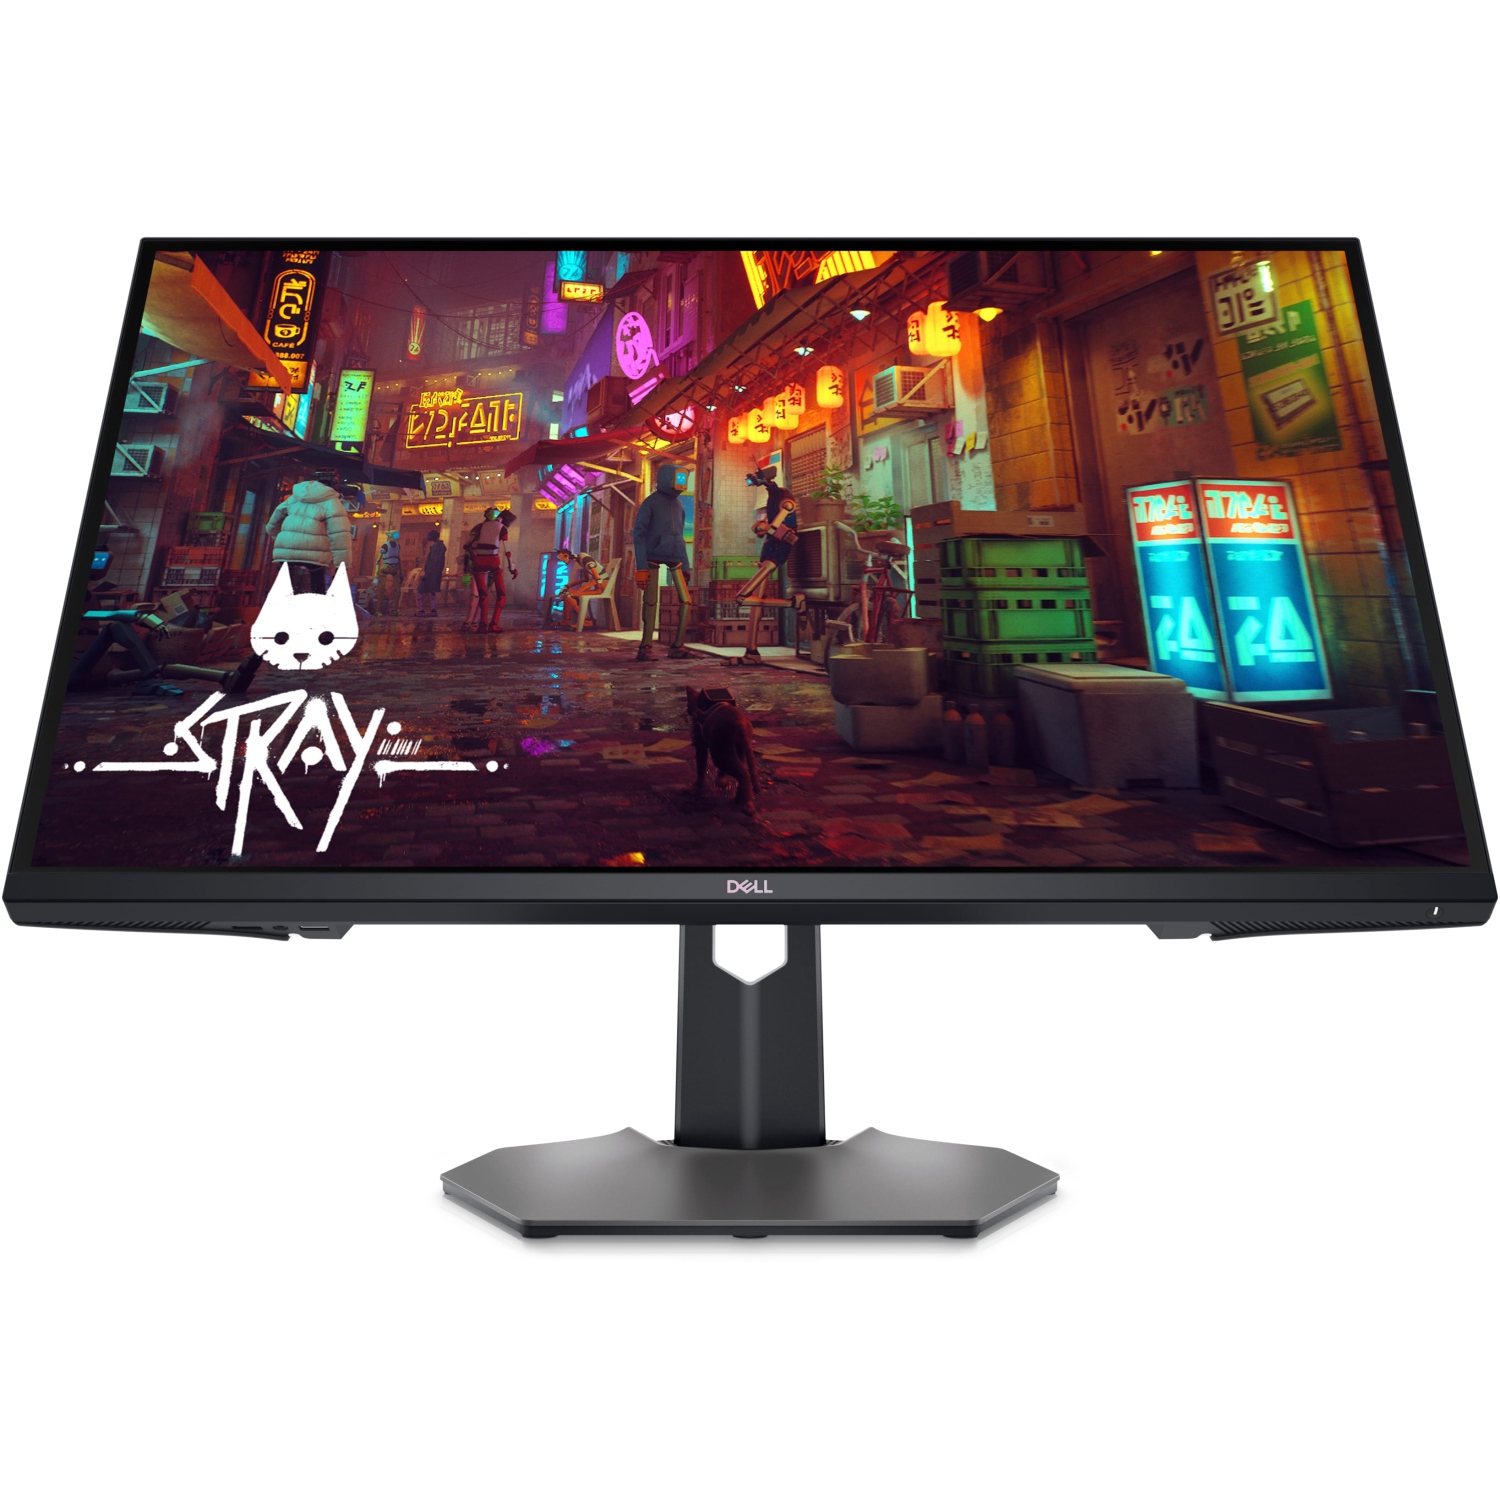 Refurbished (Excellent) - Dell G3223Q (Gaming) Monitor 32" 4K UHD 3840x2160 144Hz, AMD FreeSync PP, DP, 2xHDMI, USB3.2 - Certified Refurbished